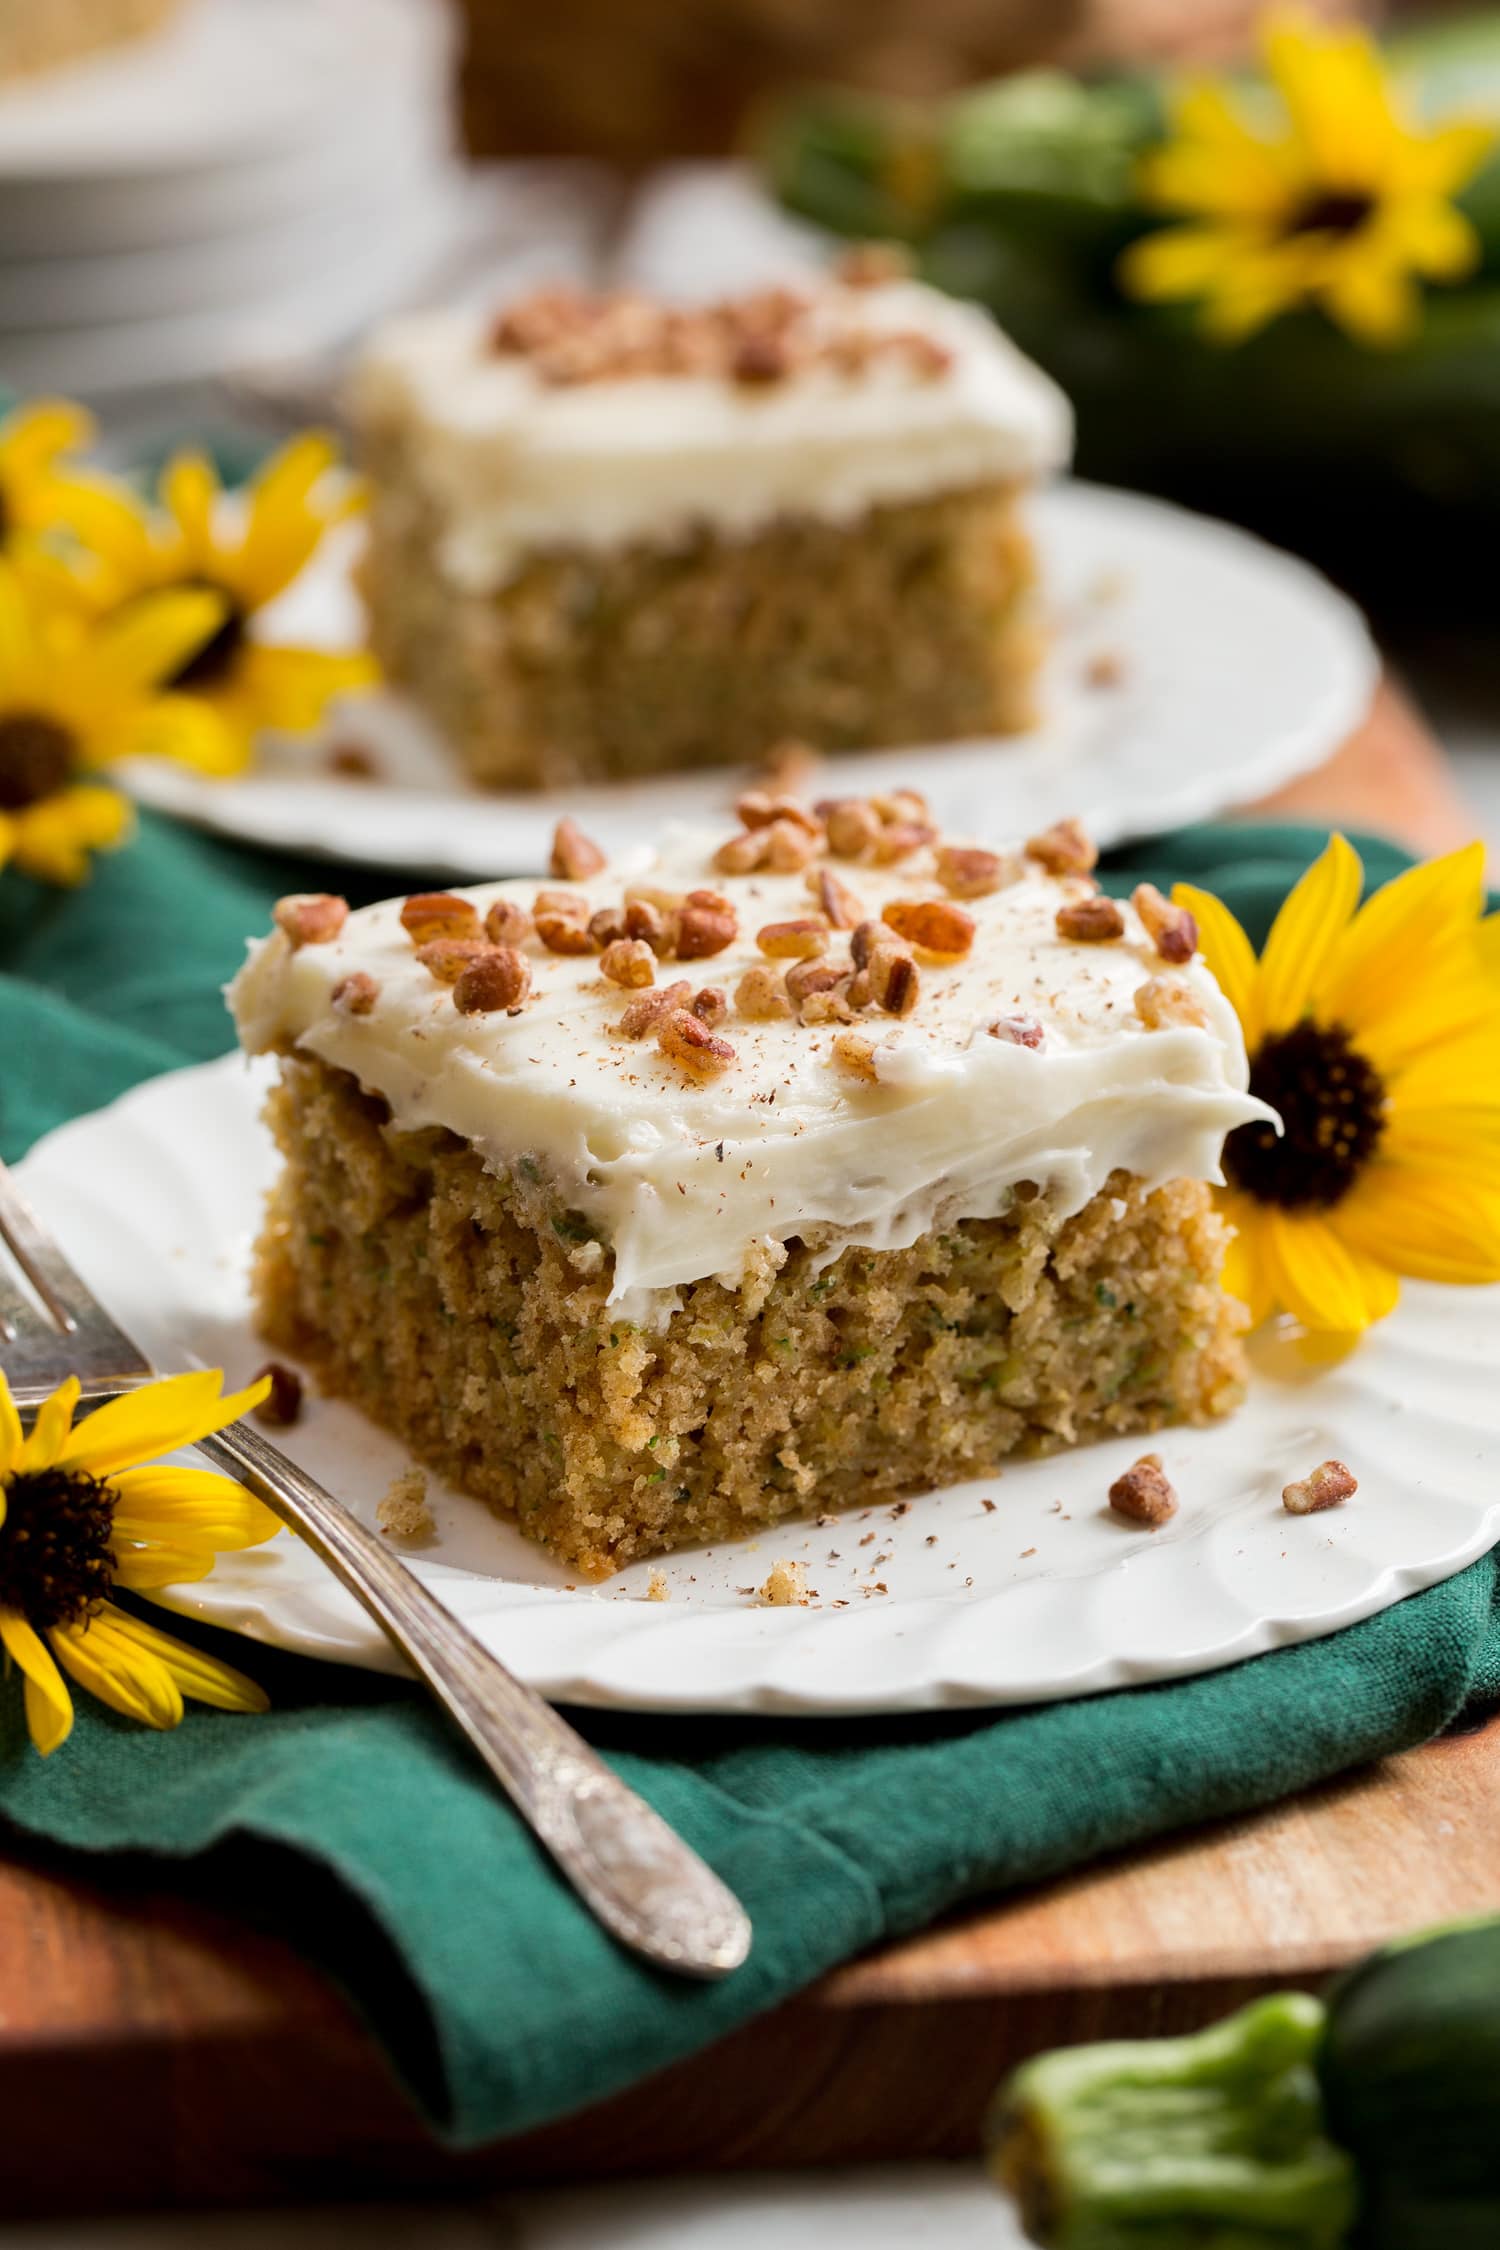 Two slices of homemade zucchini cake with cream cheese frosting with sunflowers decorating plates.